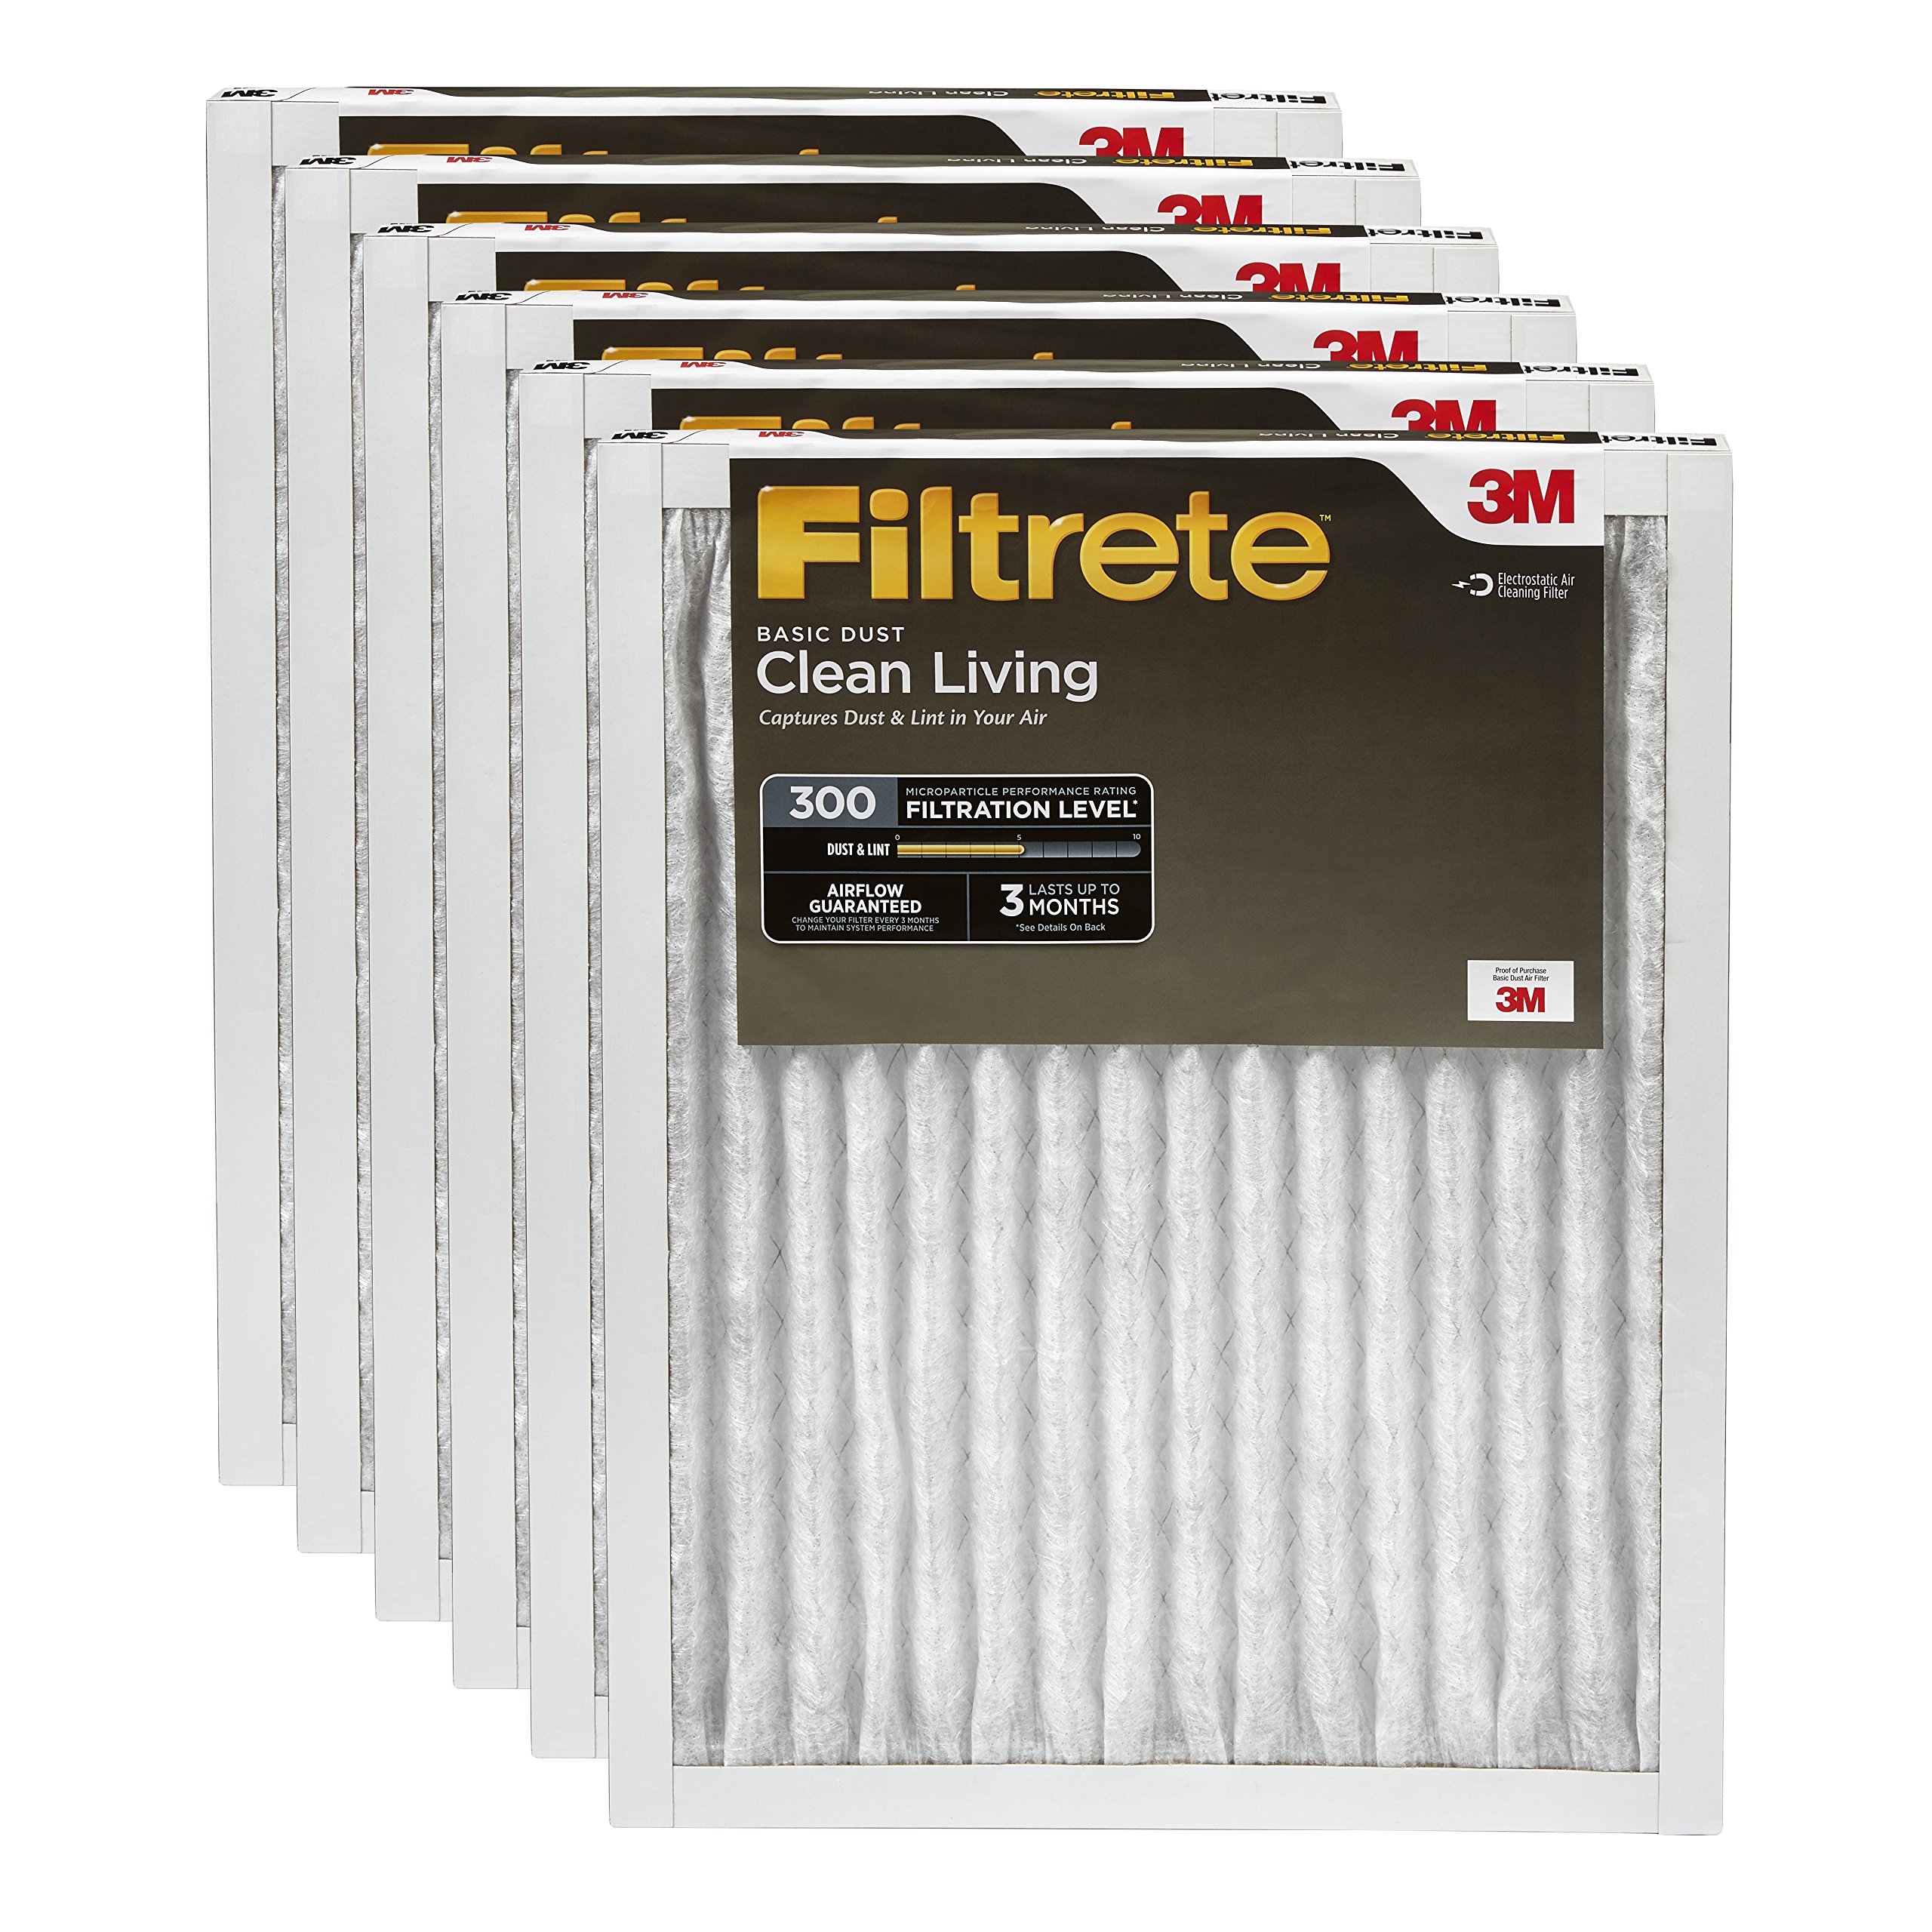 Filtrete Clean Living Basic Dust Filter, MPR 300, 16 x 25 x 1-Inches 6-Pack